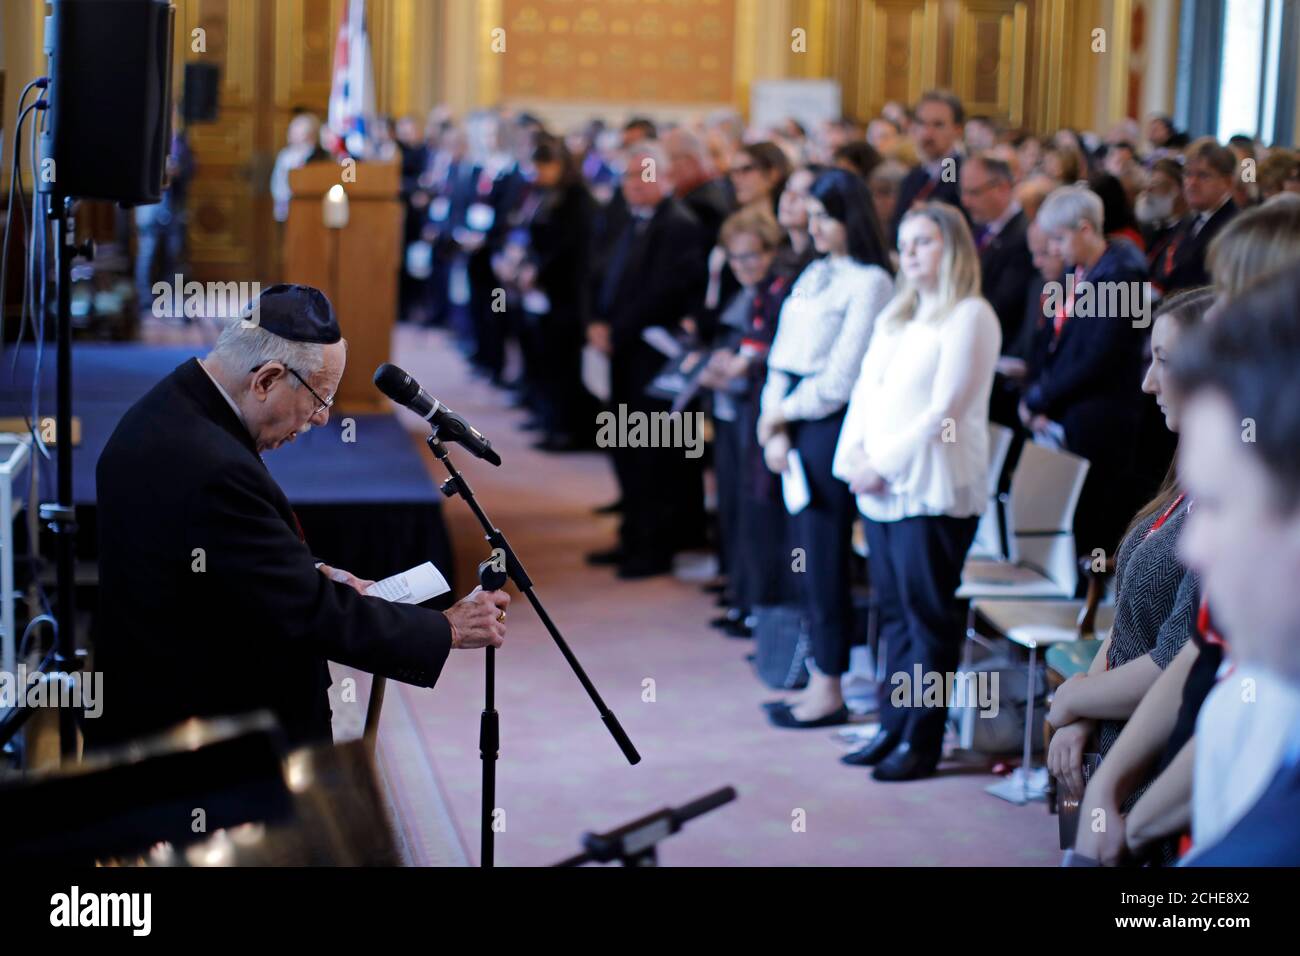 Rabbi Harry Jacobi sings to the audience at the annual Holocaust Memorial Day Commemoration event at the Foreign & Commonwealth Office, London. Stock Photo